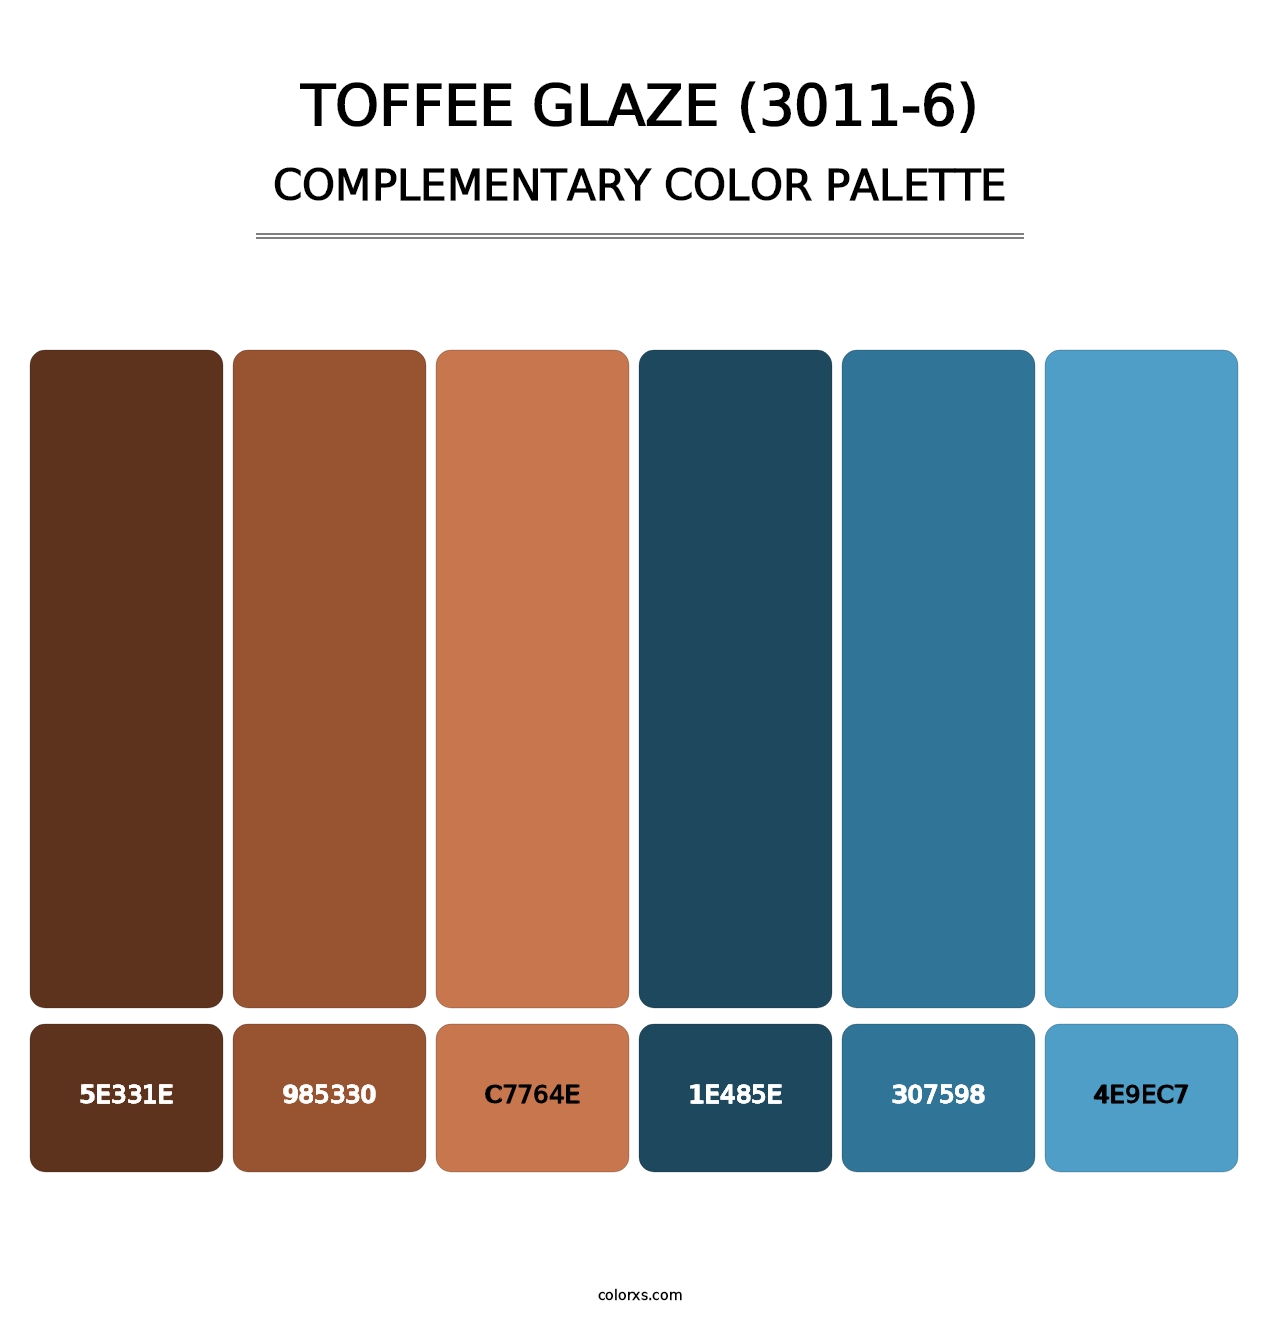 Toffee Glaze (3011-6) - Complementary Color Palette